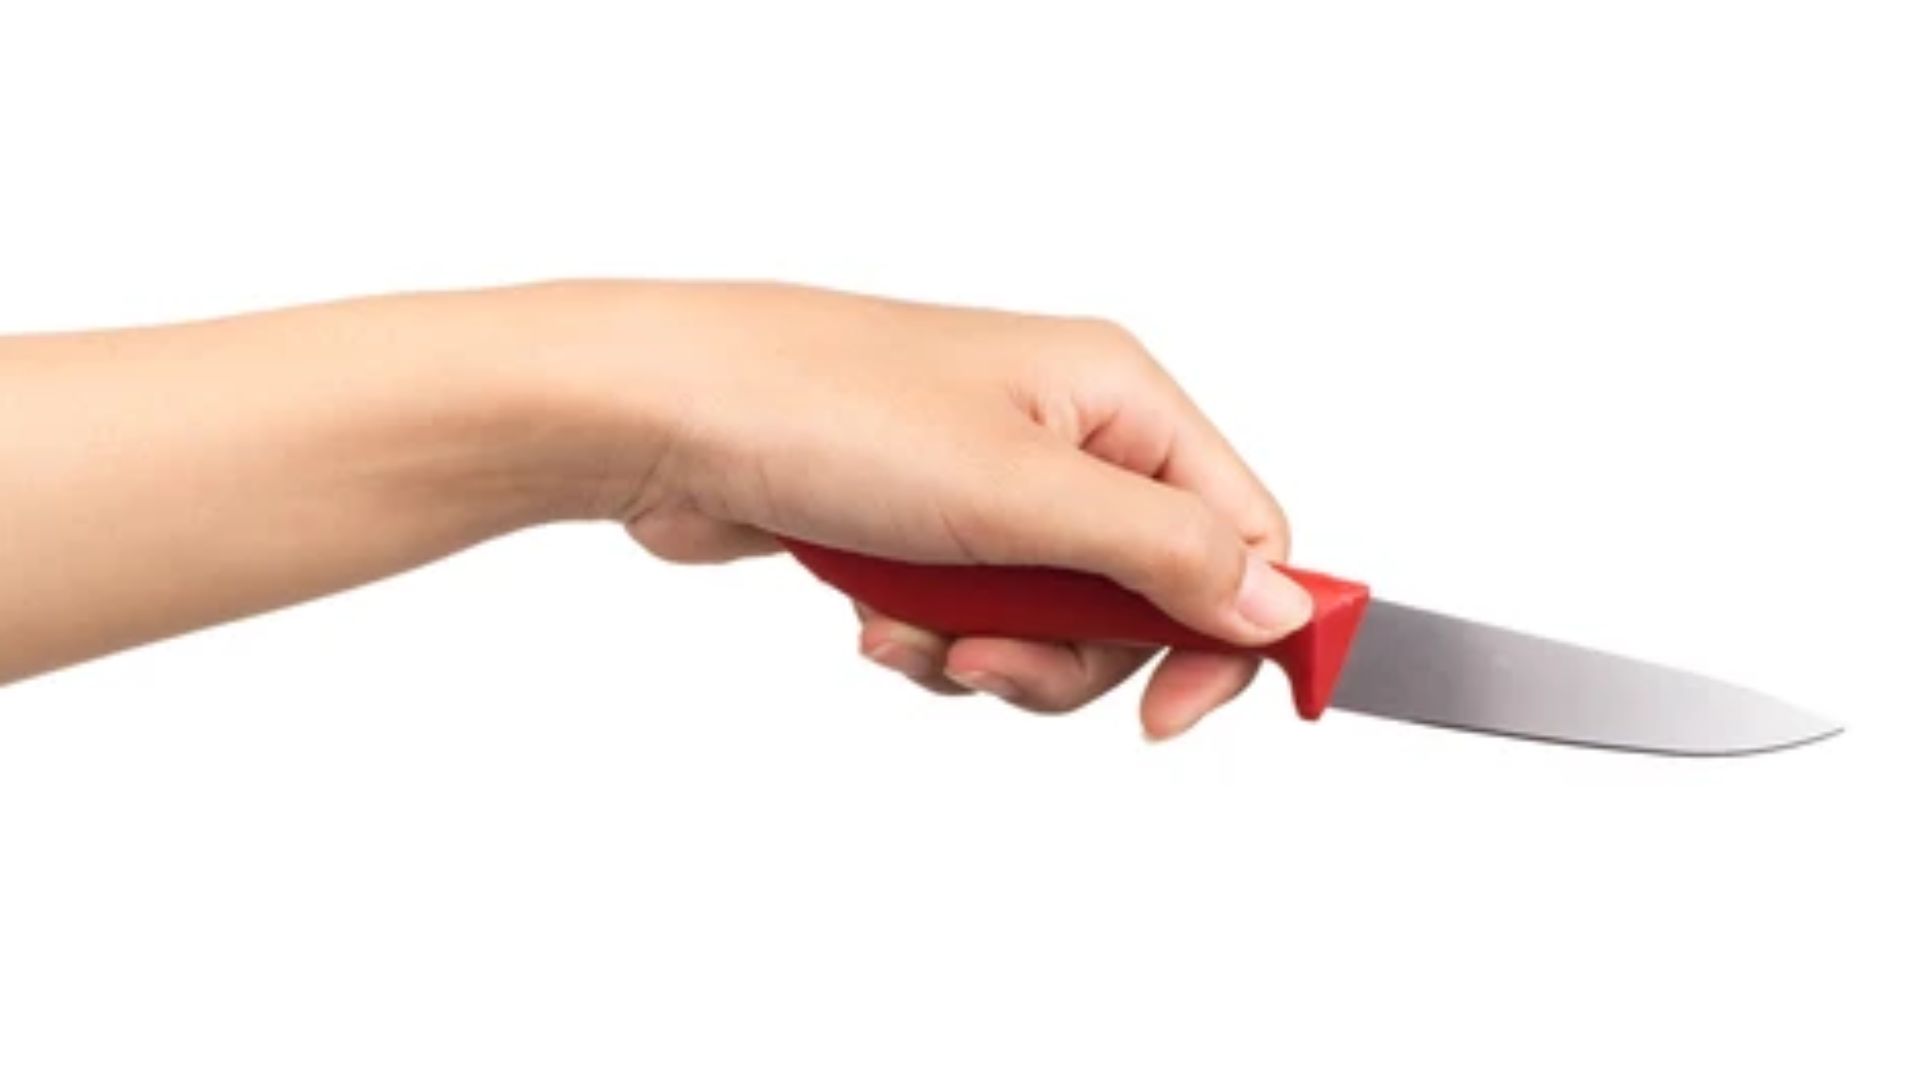 Person Holding A Small Knife